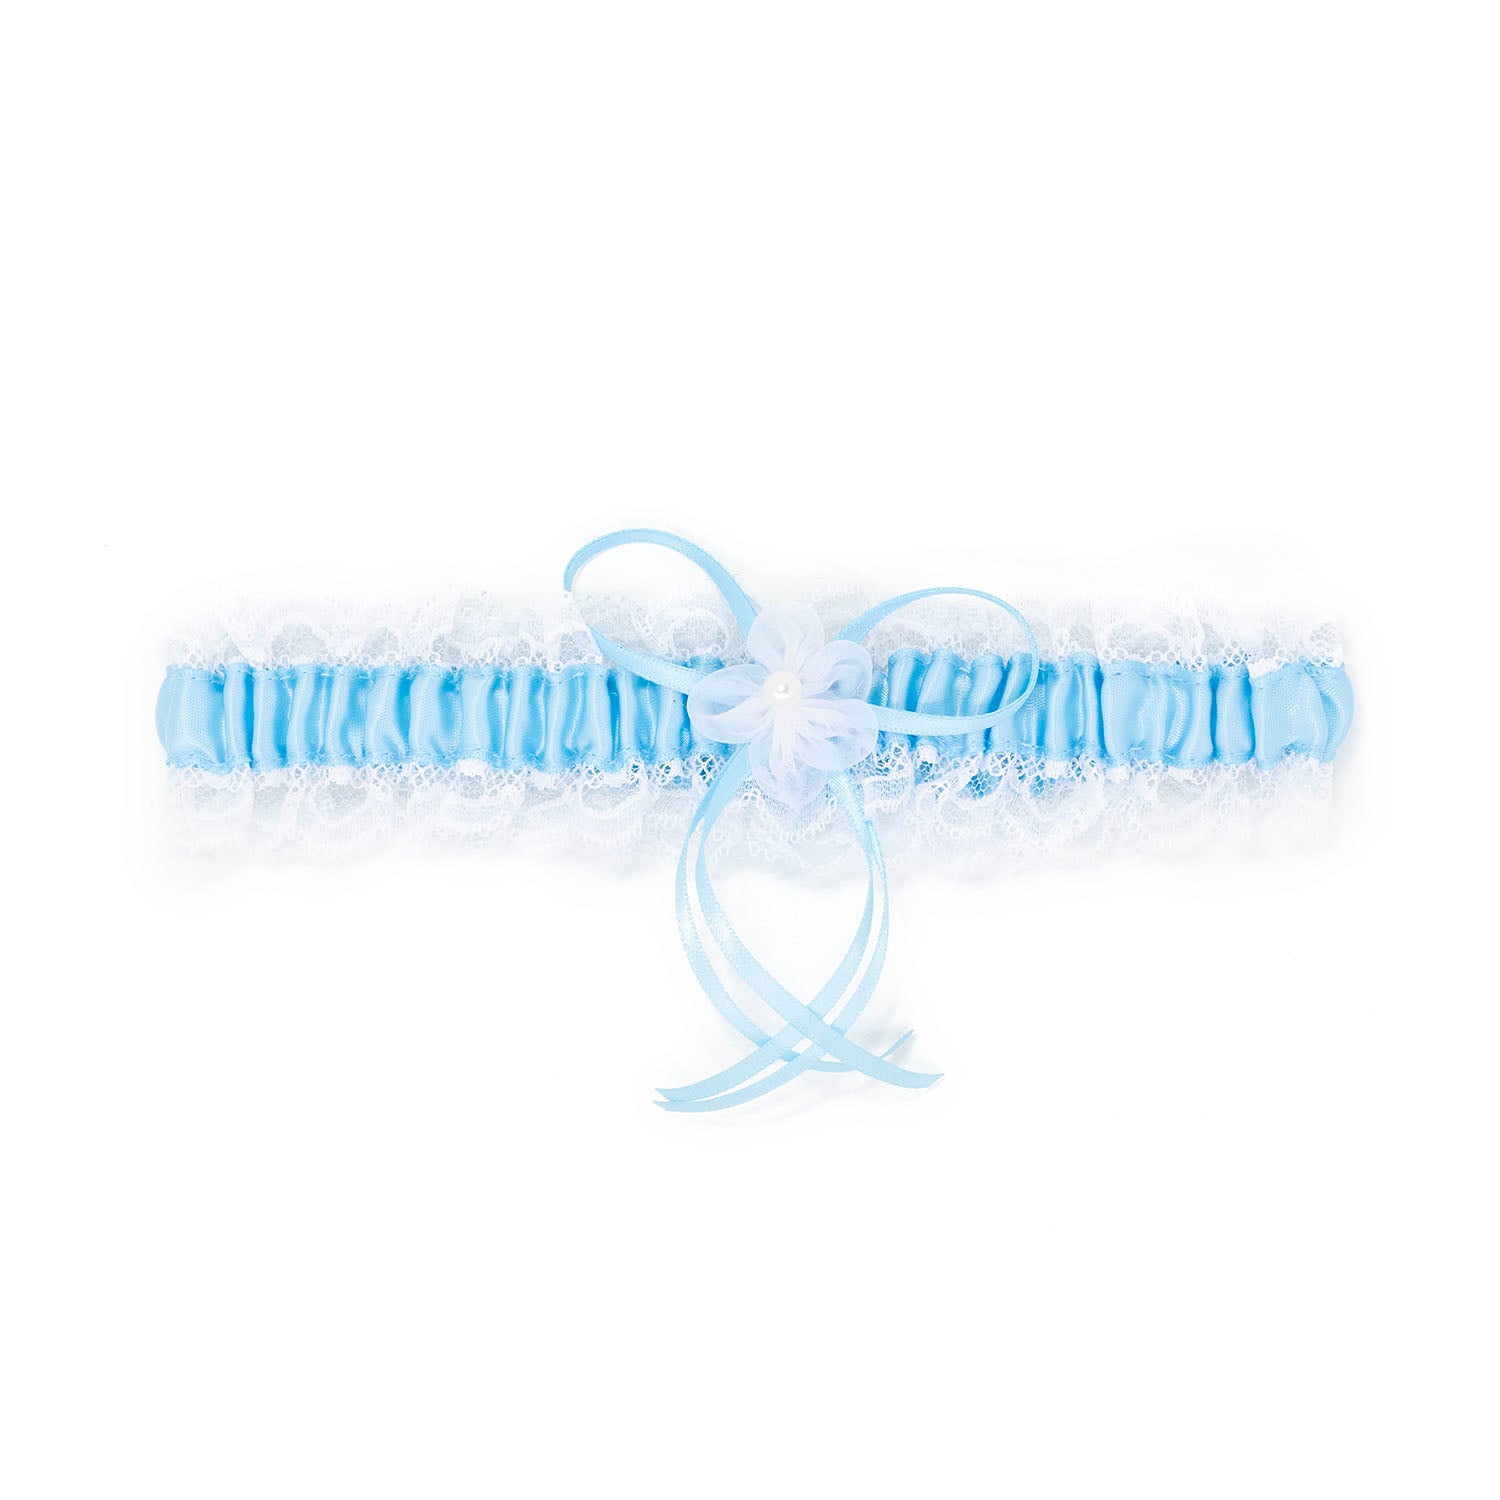 Blue wedding garter for bride with lace